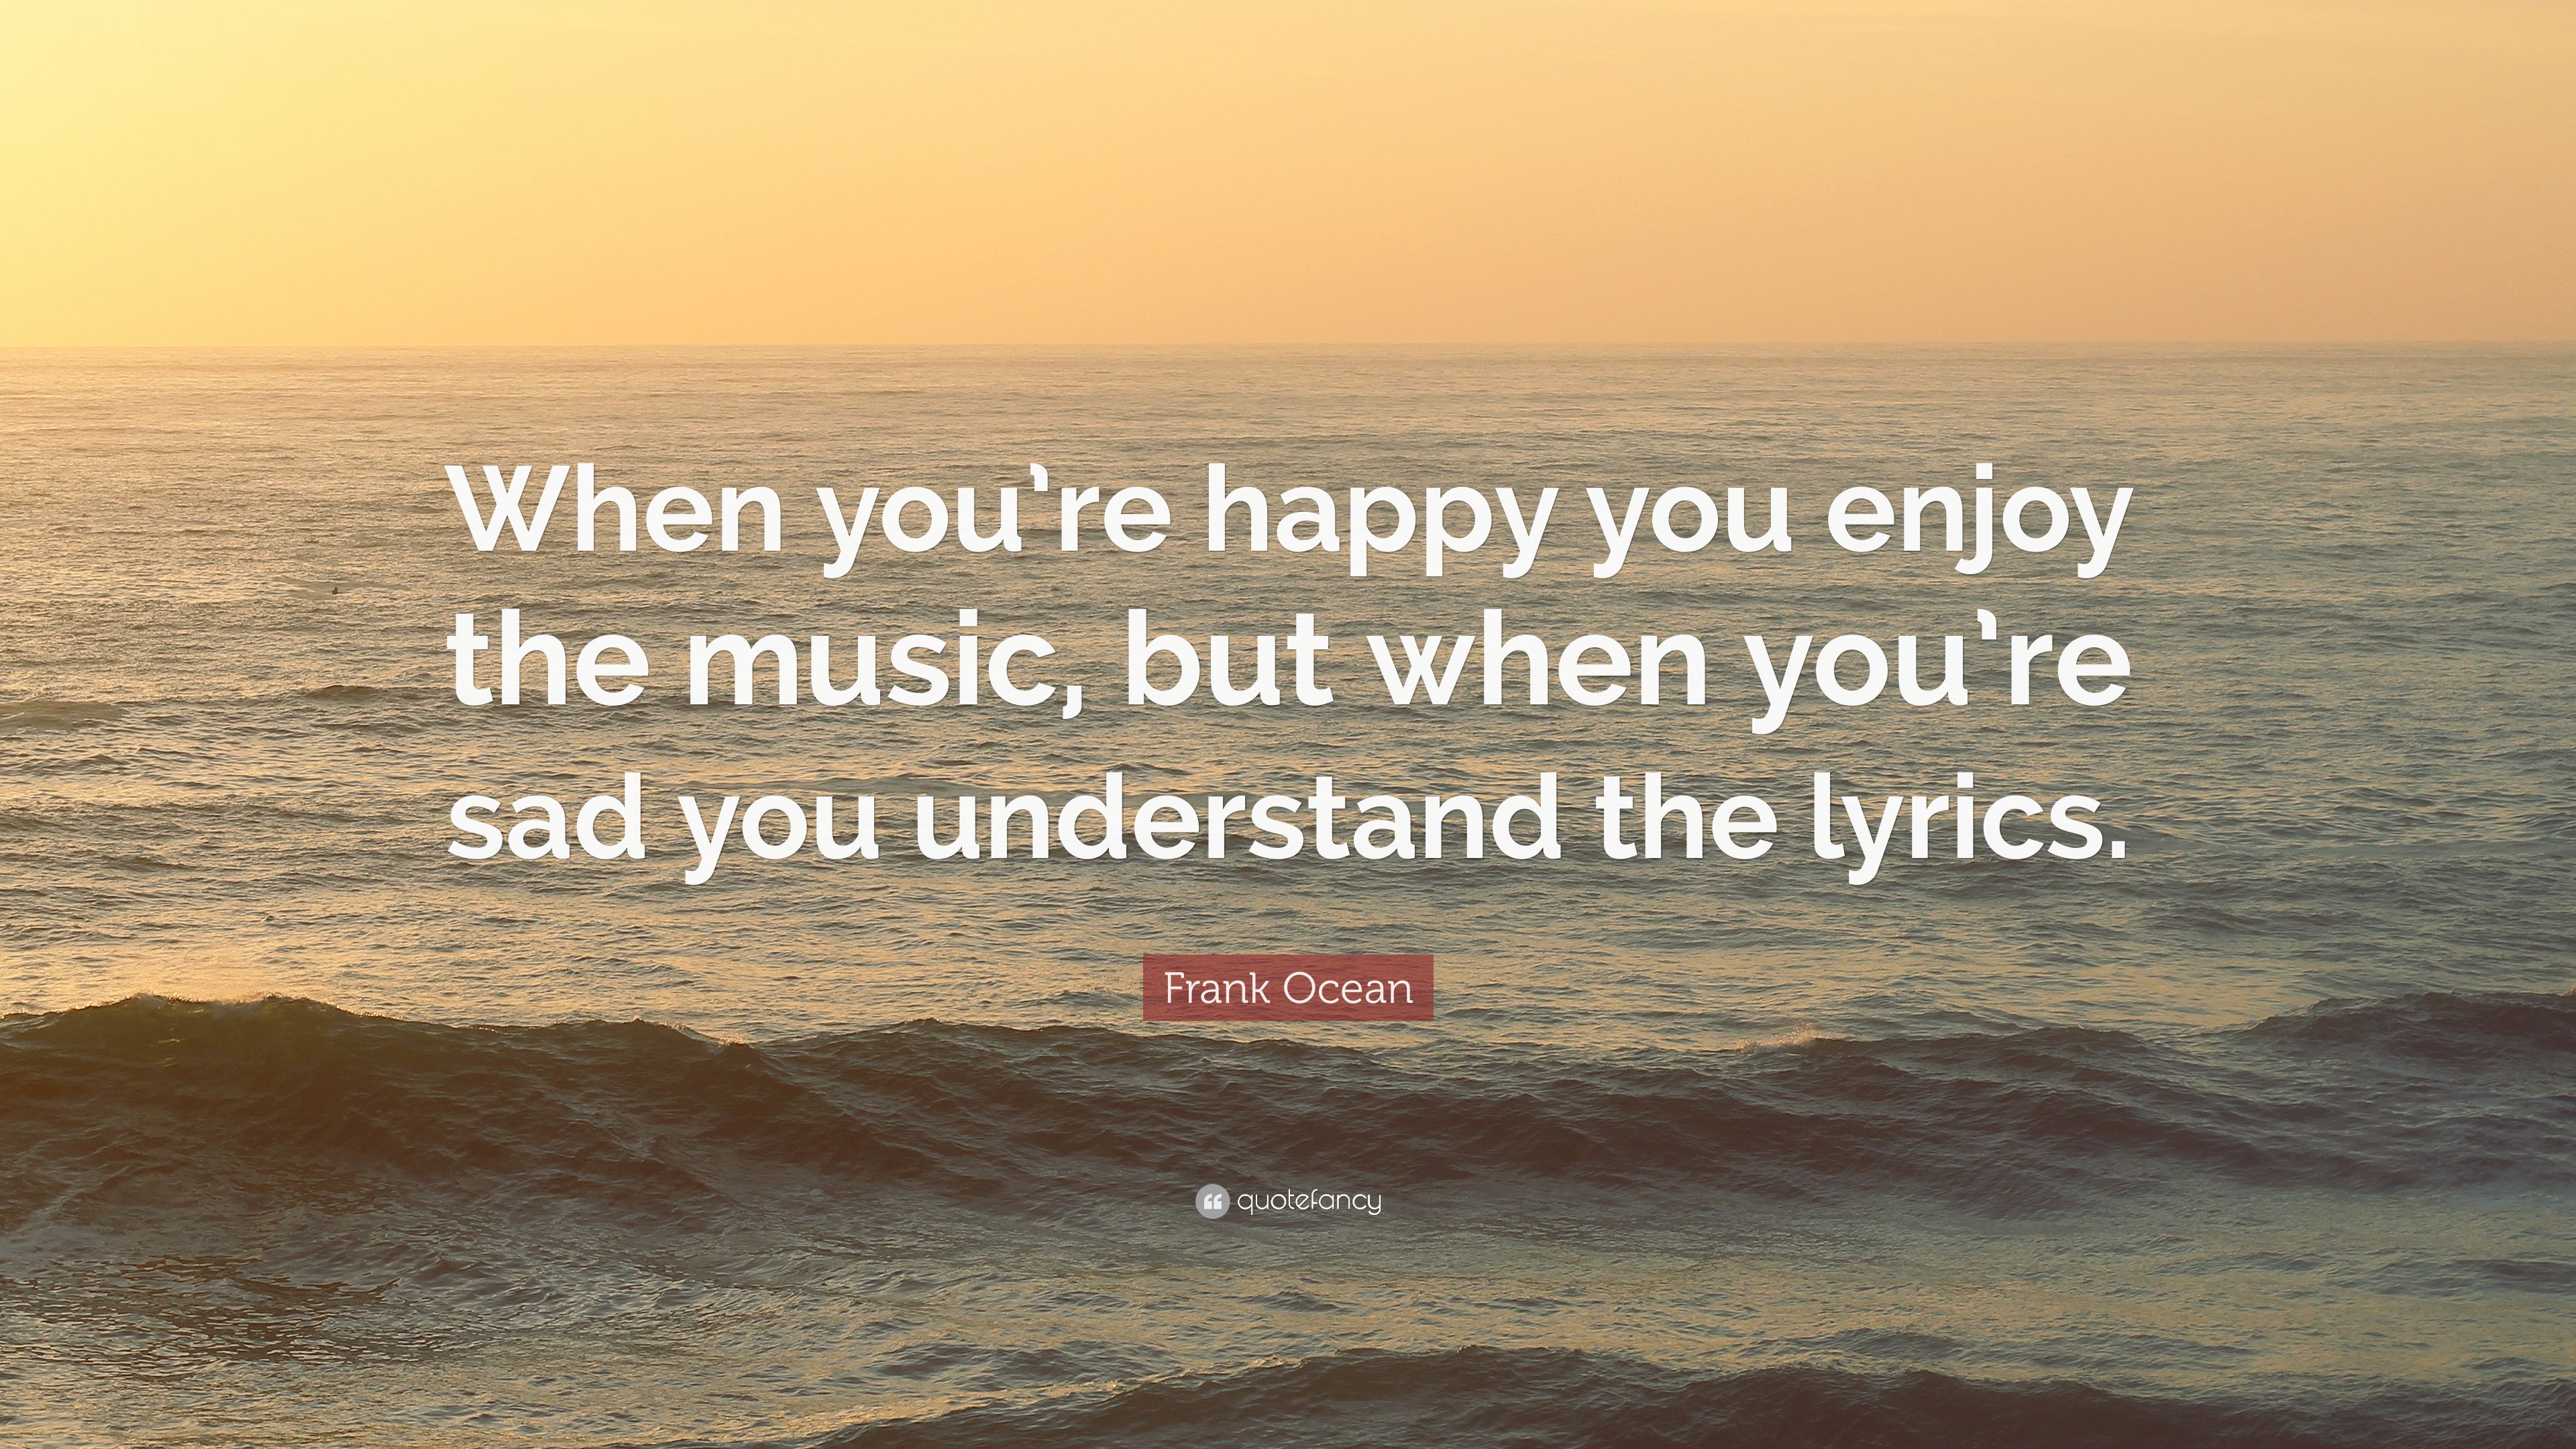 Frank Ocean Quote: “When you're happy you enjoy the music, but